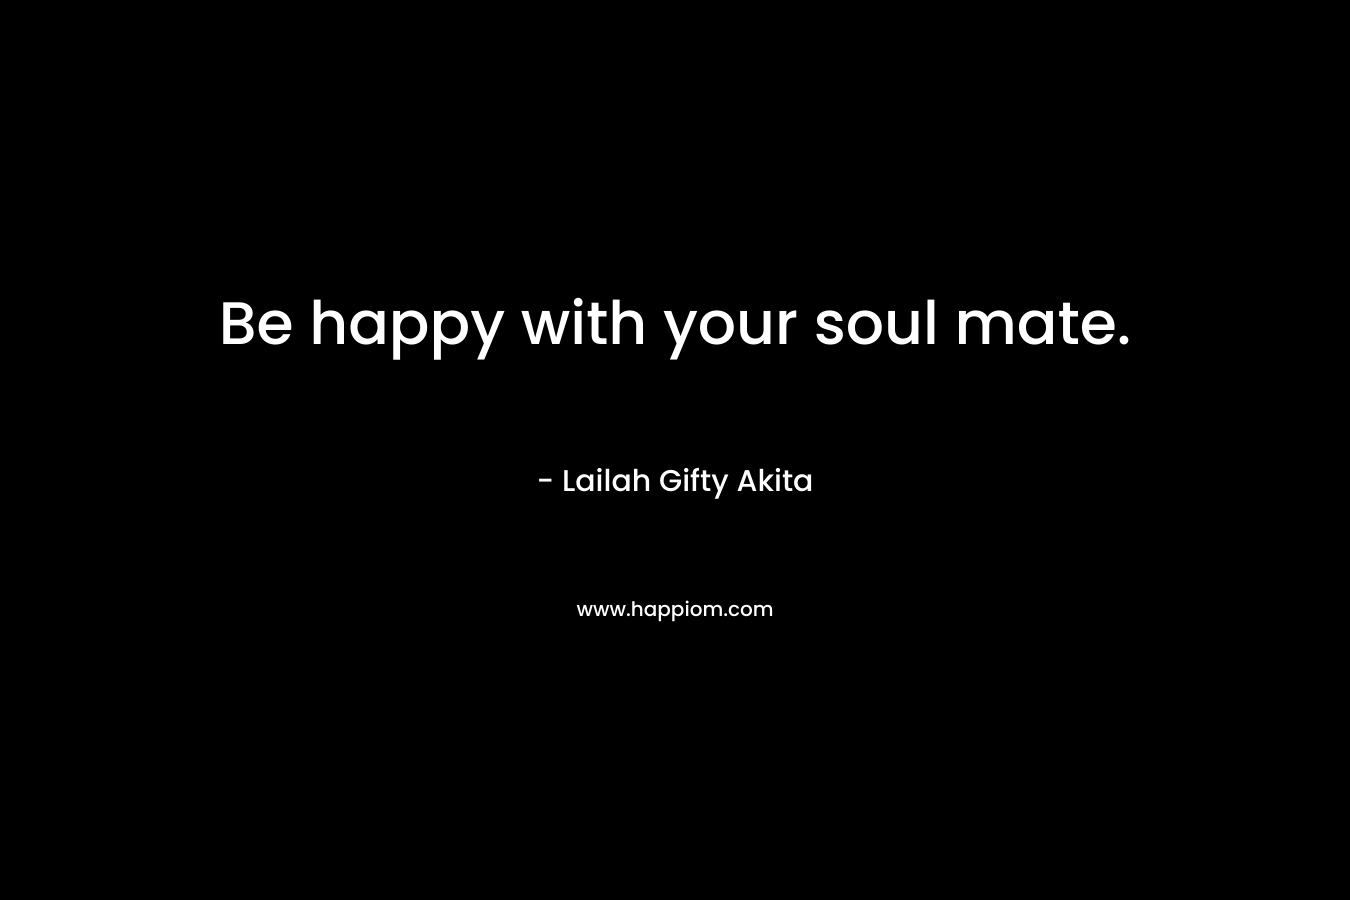 Be happy with your soul mate.